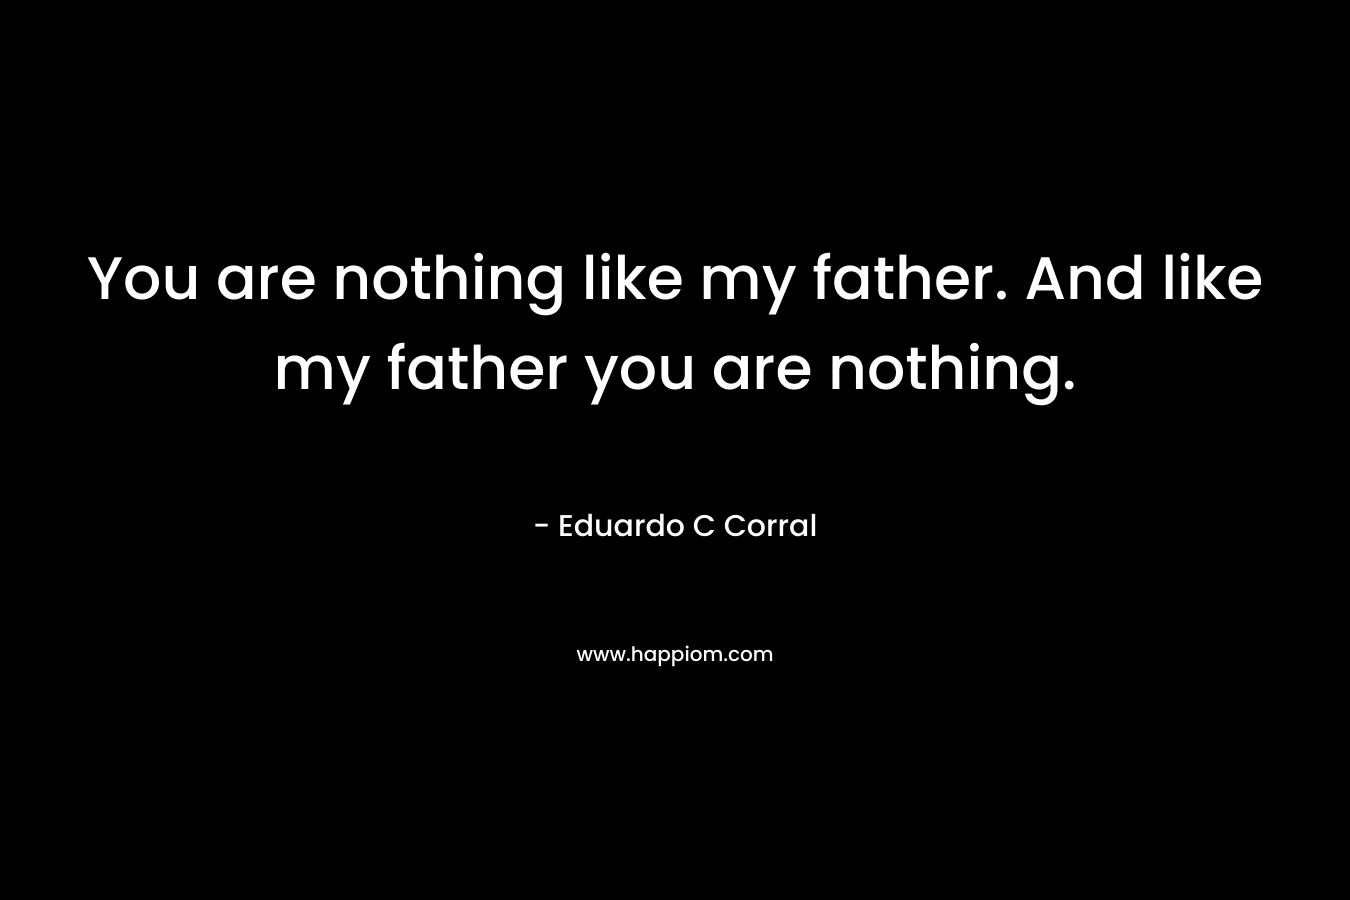 You are nothing like my father. And like my father you are nothing. – Eduardo C Corral